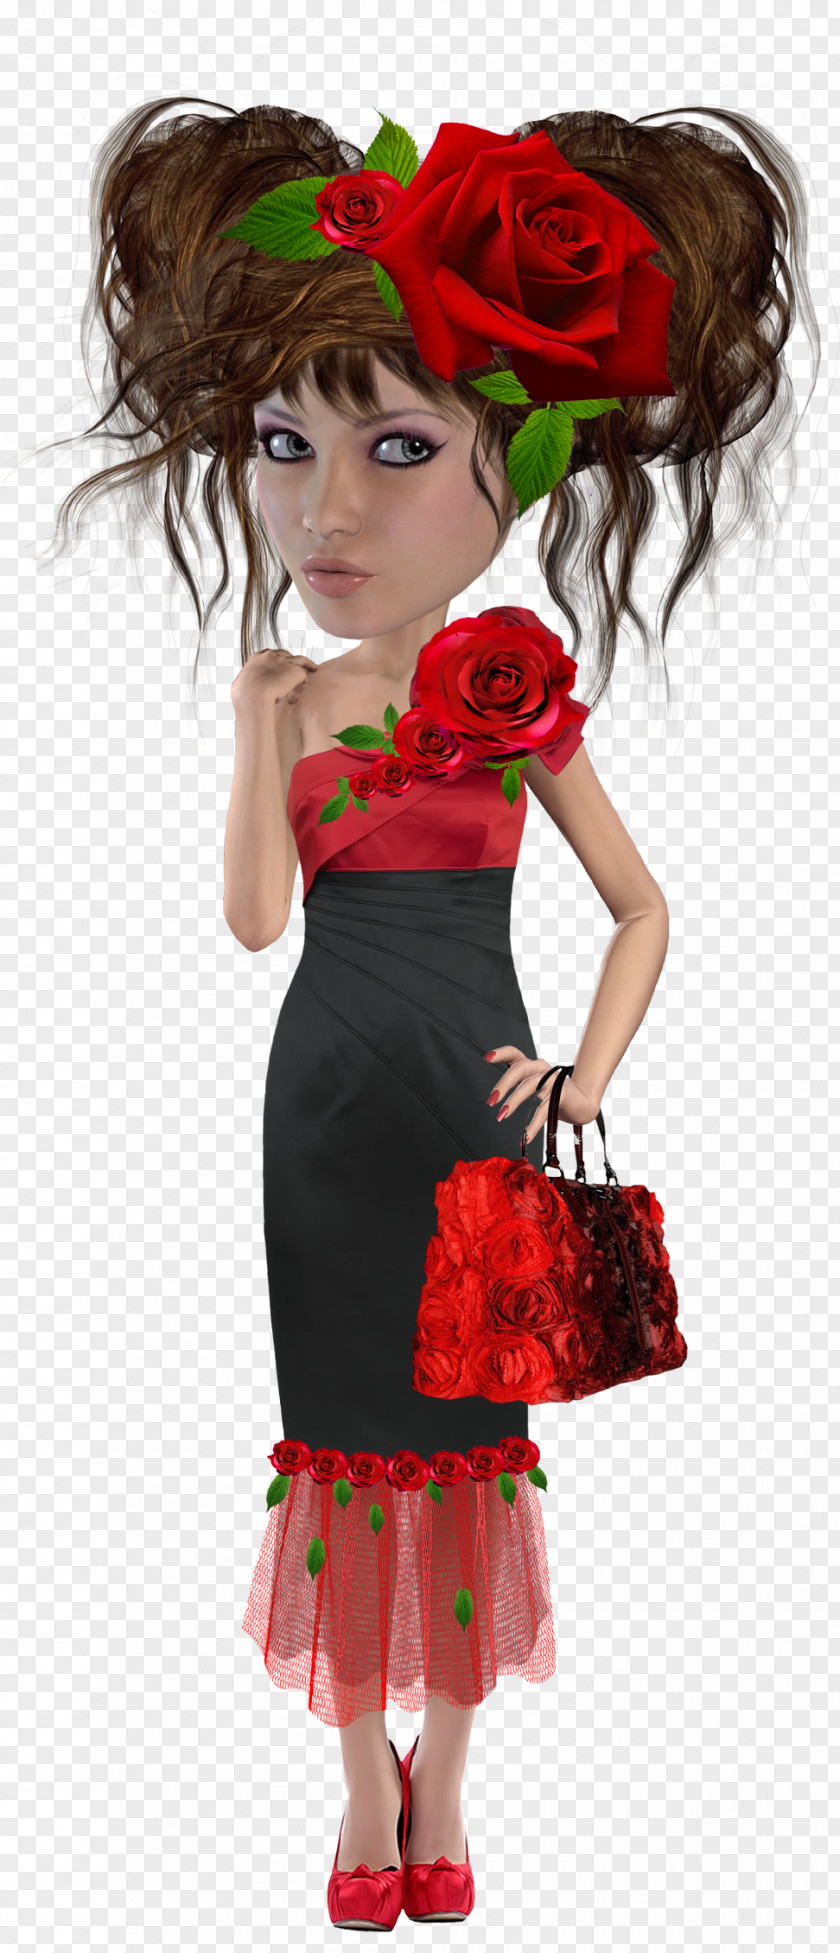 Cocktail Dress Dance Costume PNG